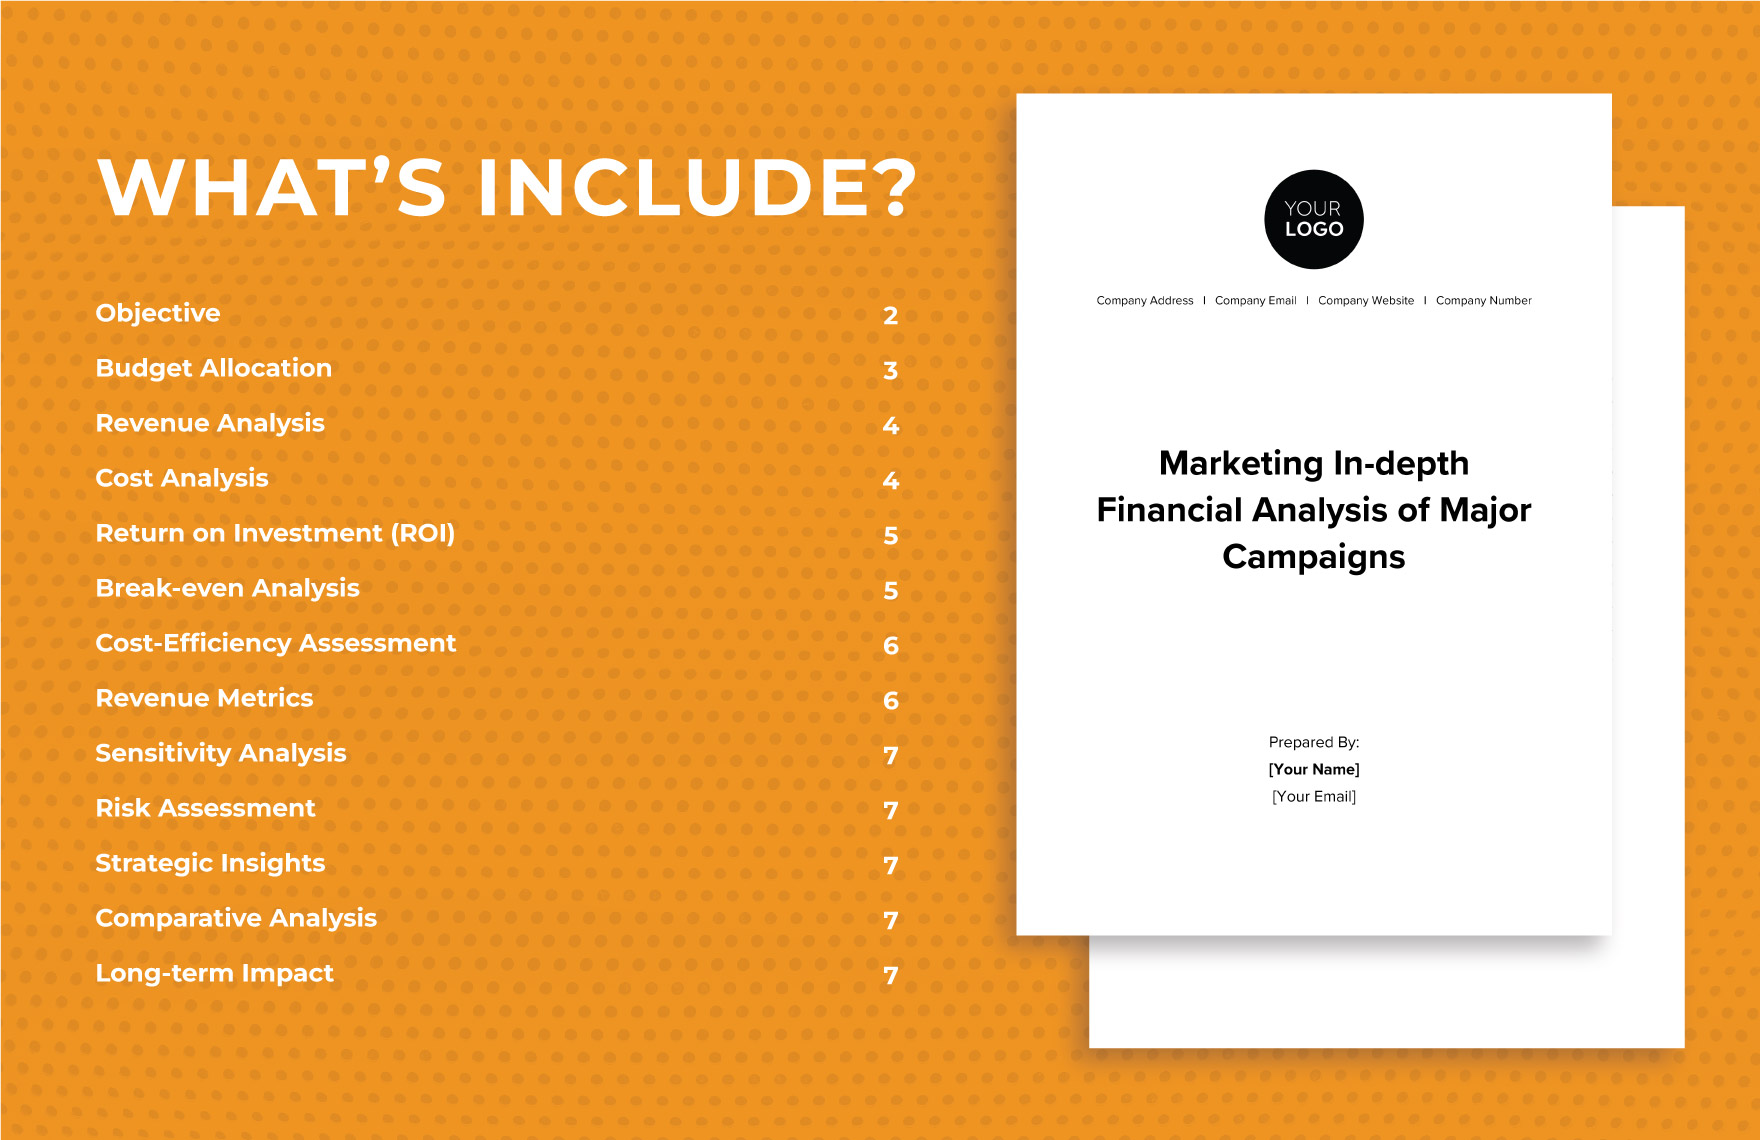 Marketing In-depth Financial Analysis of Major Campaigns Template